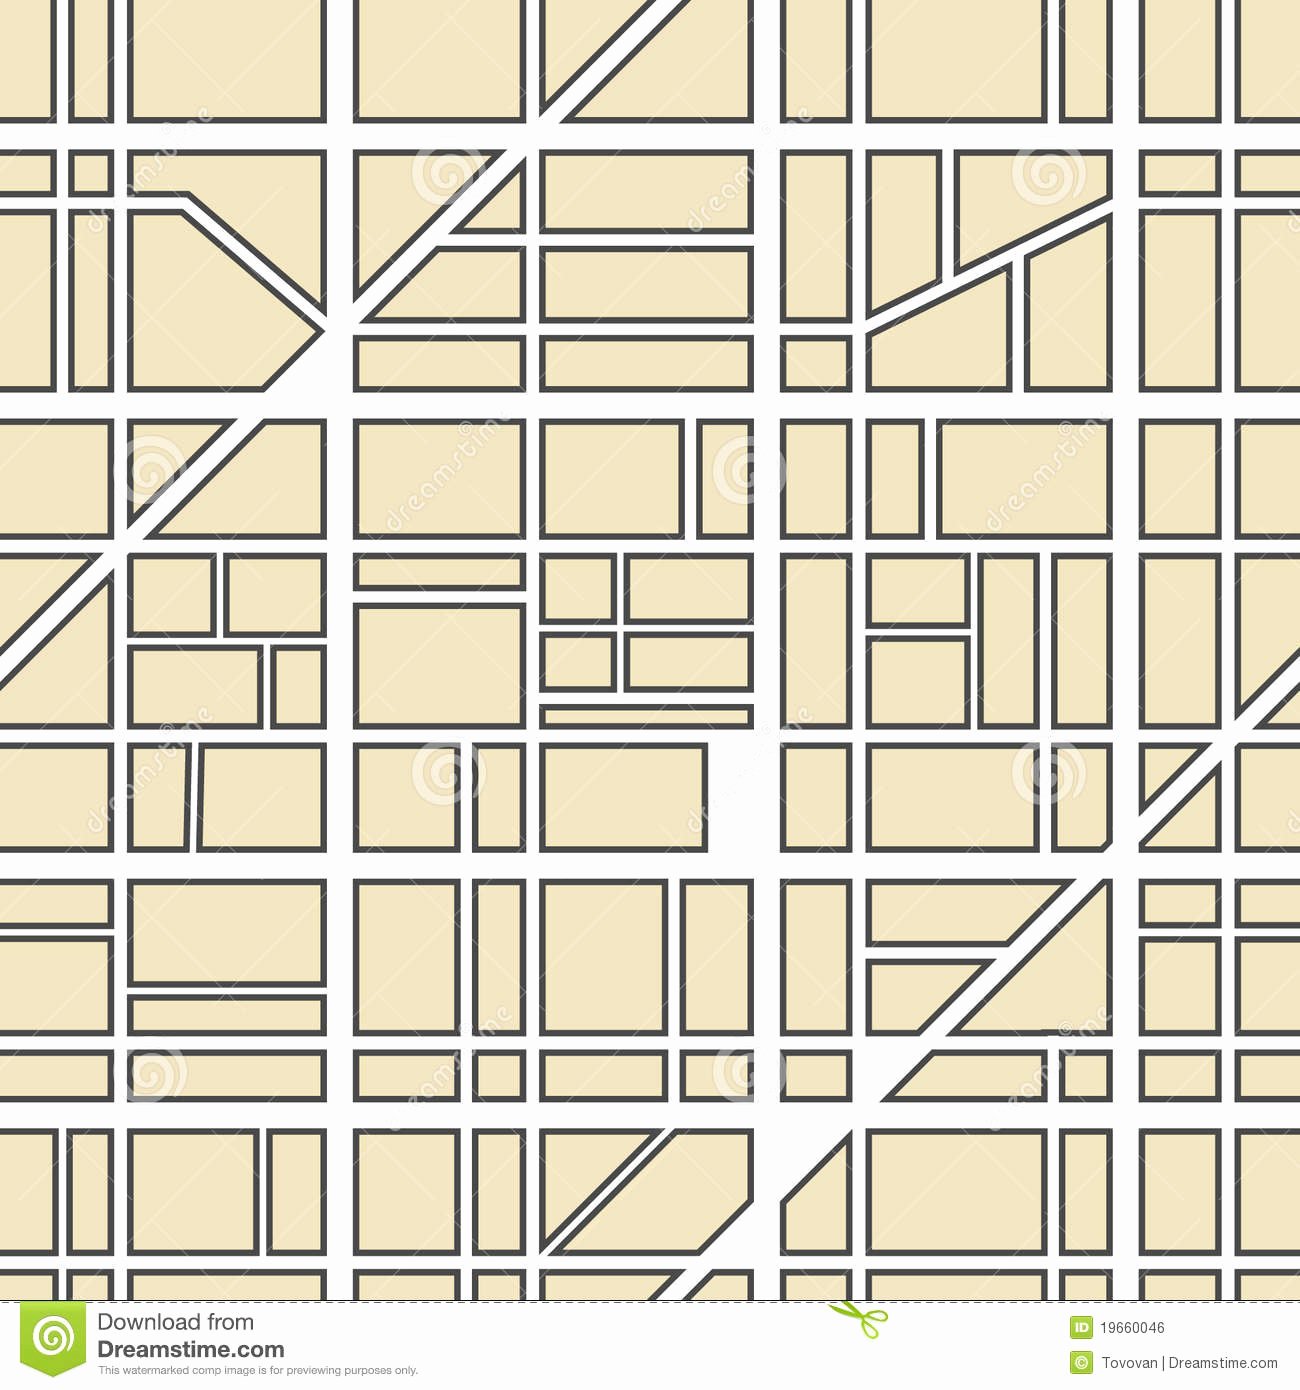 Blank City Map Template New City Street Map Clip Art – Cliparts